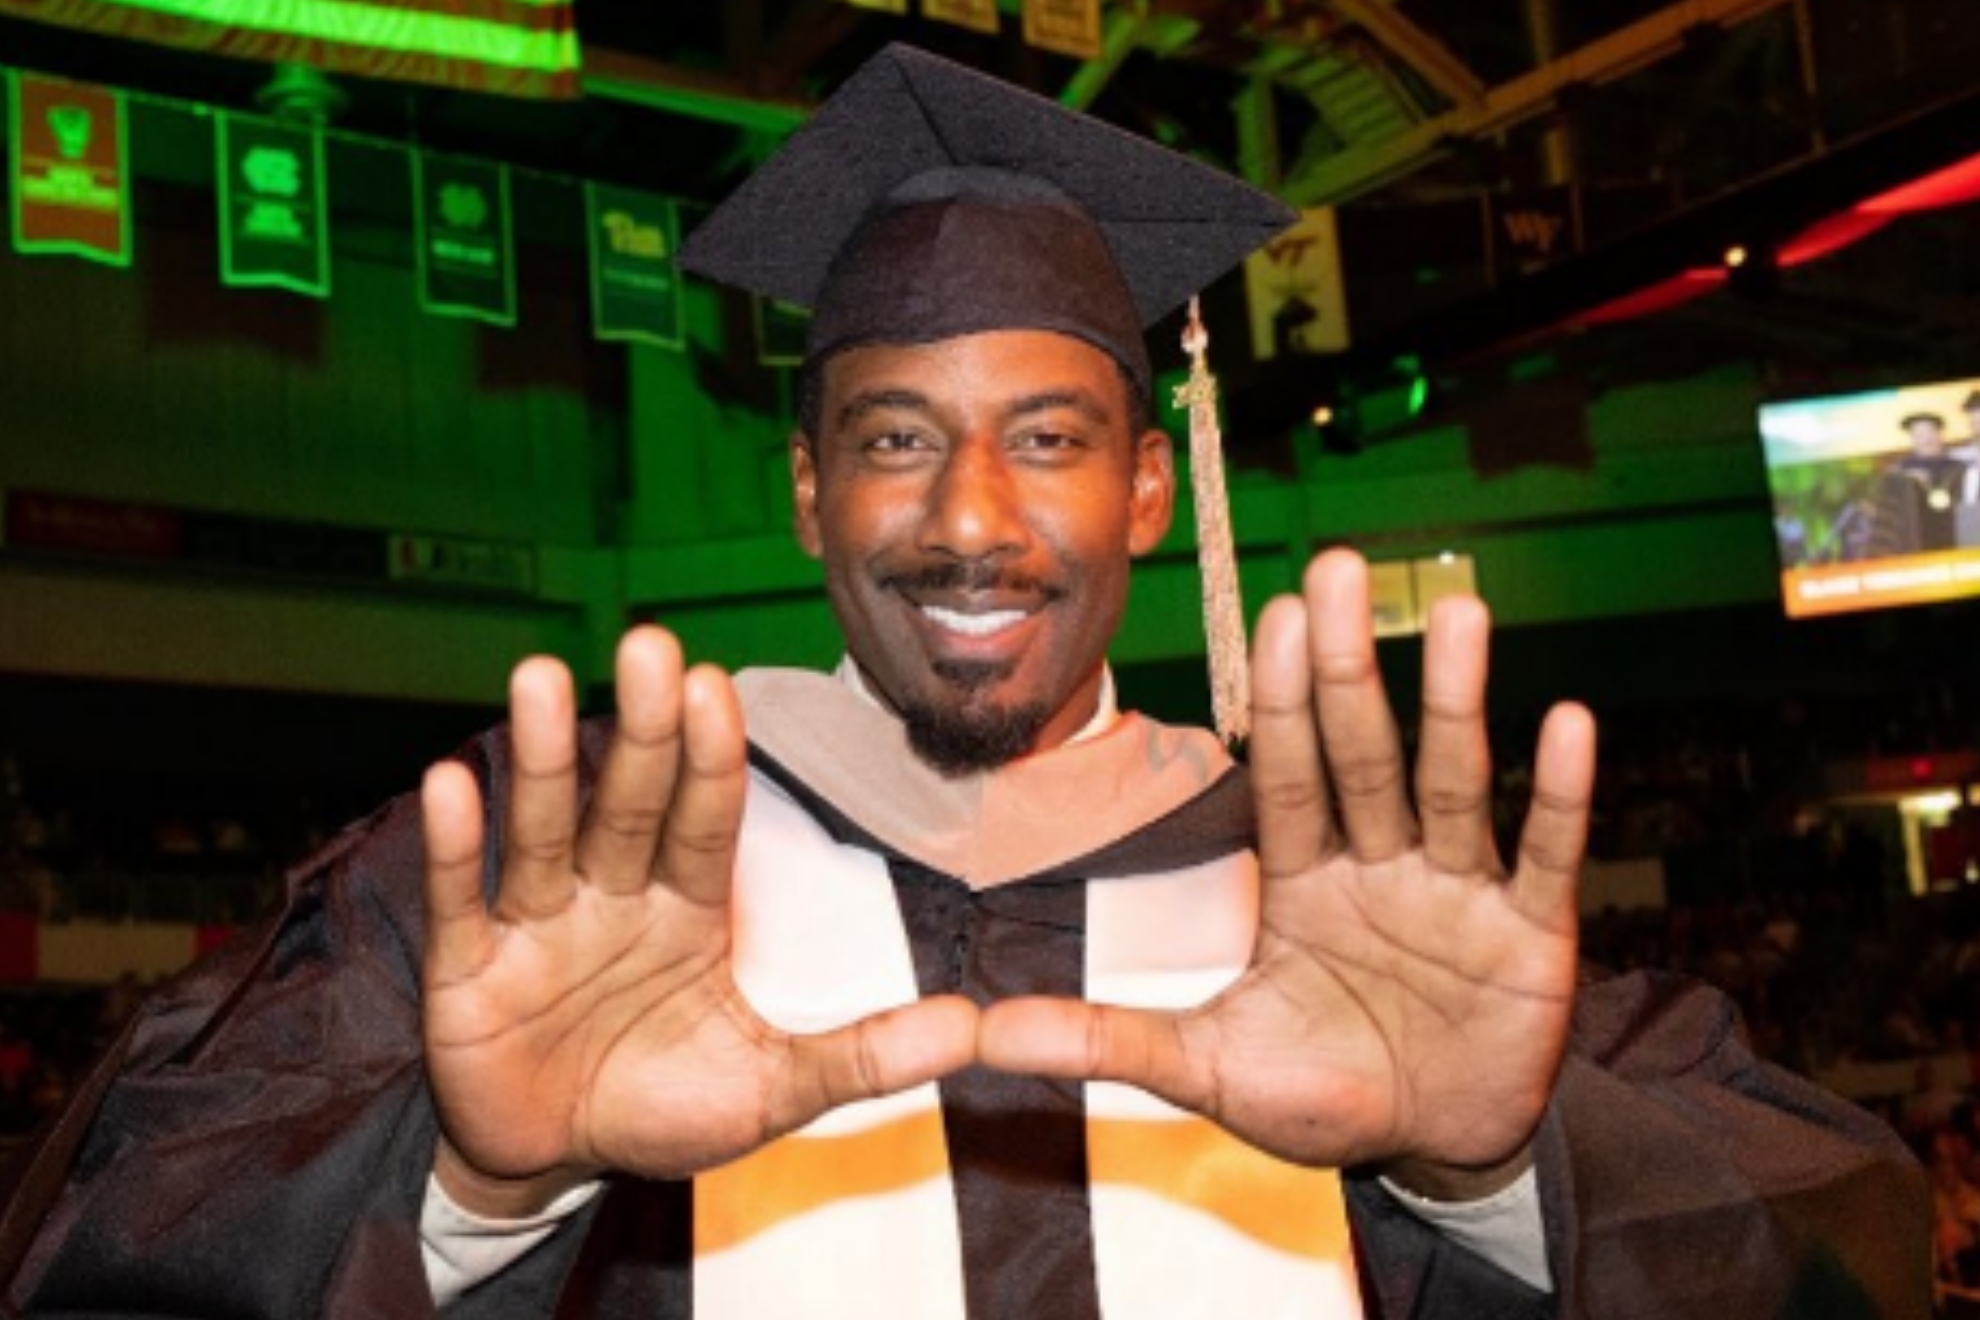 Stoudemire recently obtained a Masters degree from the University of Miami.